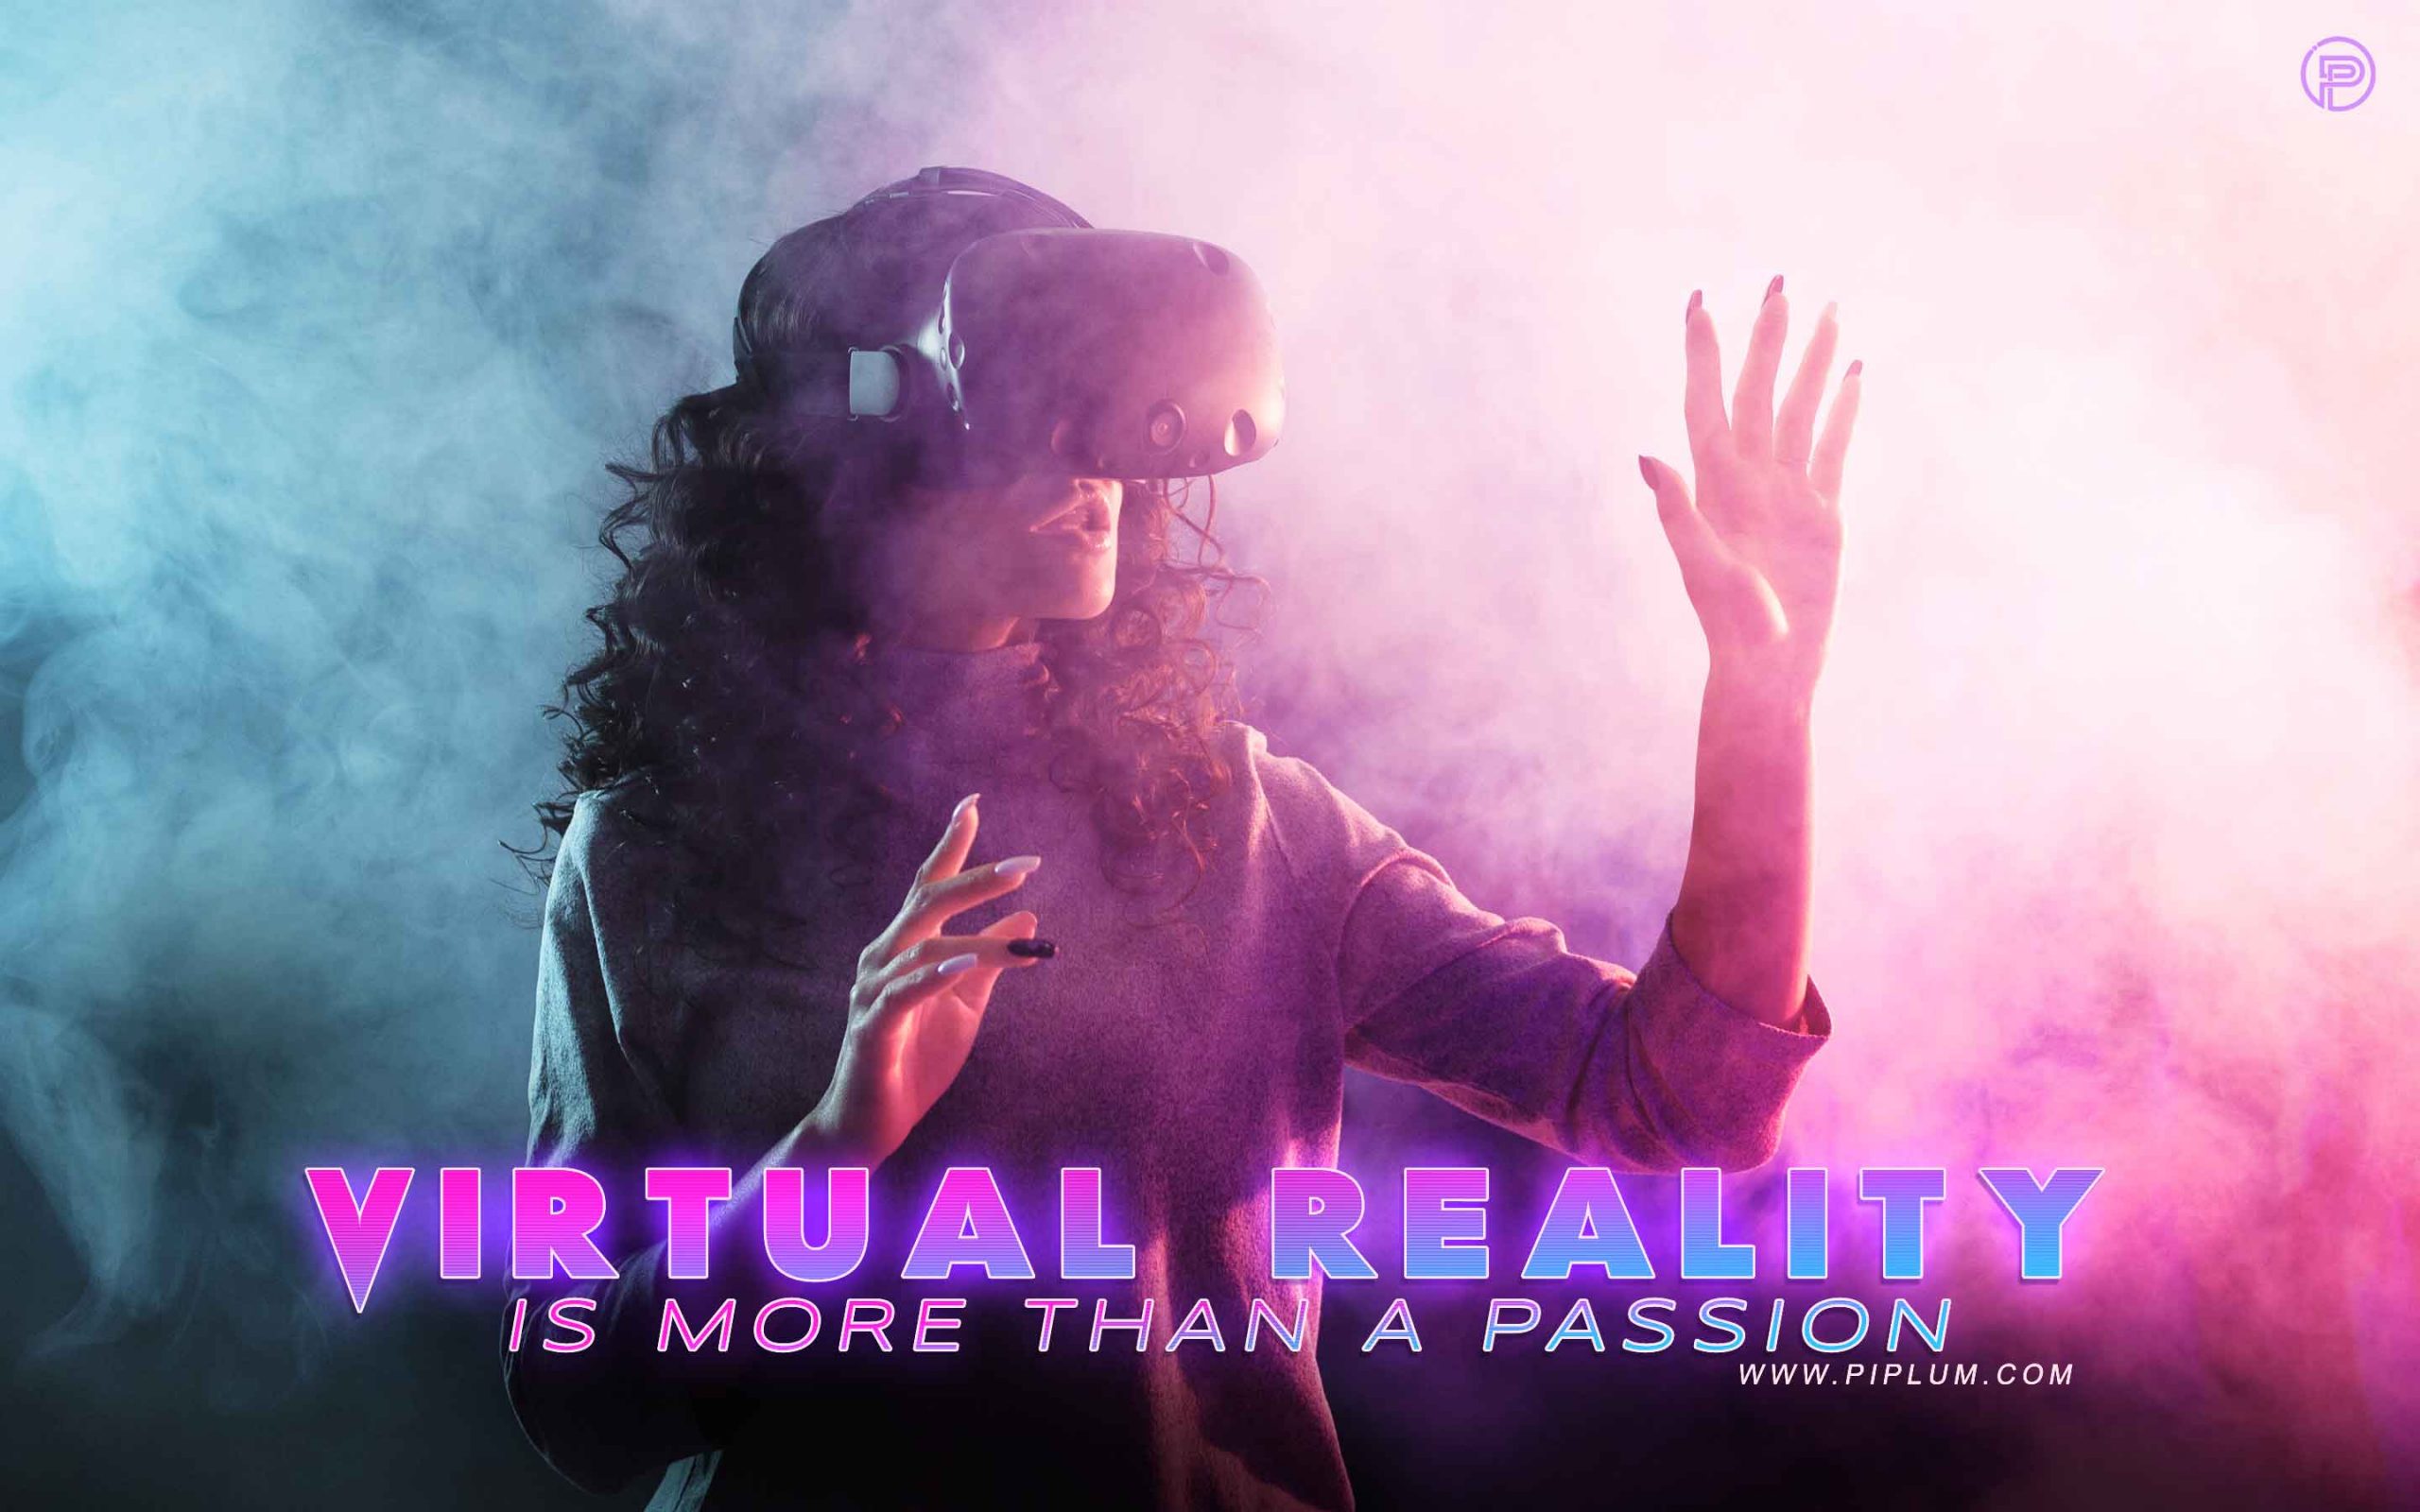 Virtual reality is more than a passion. VR Gaming quote.